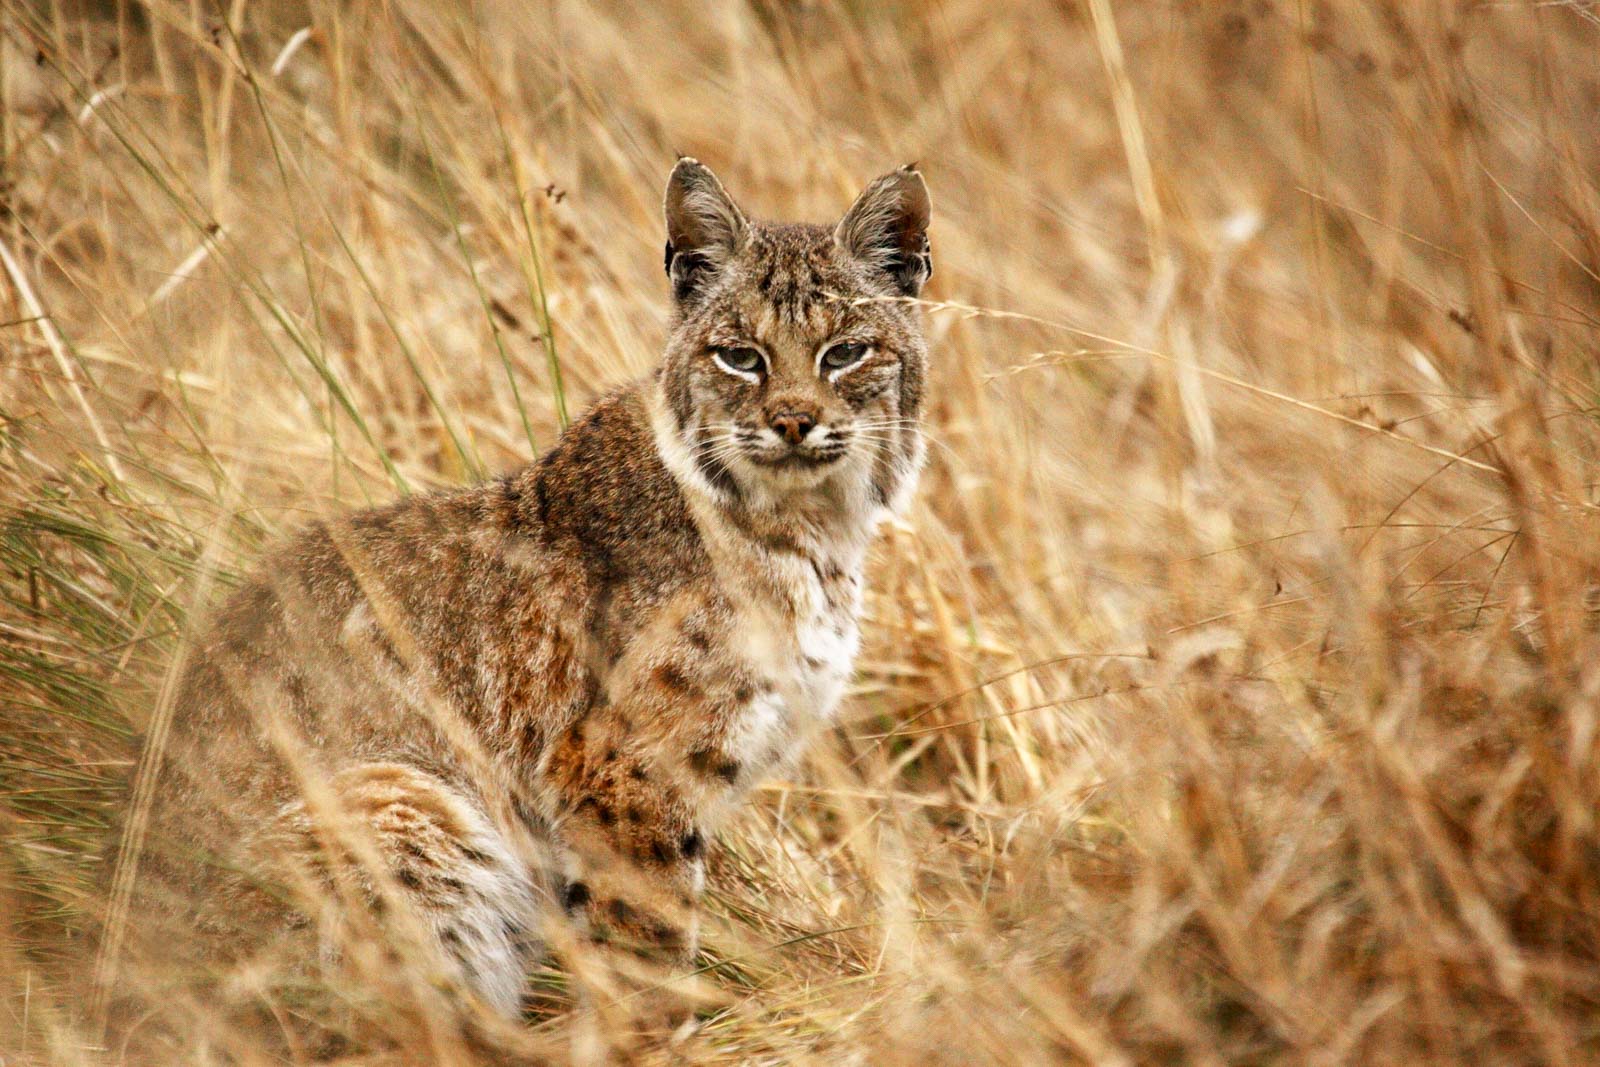 Bobcat in Grasses during out Bobcats of California Photo Tour.